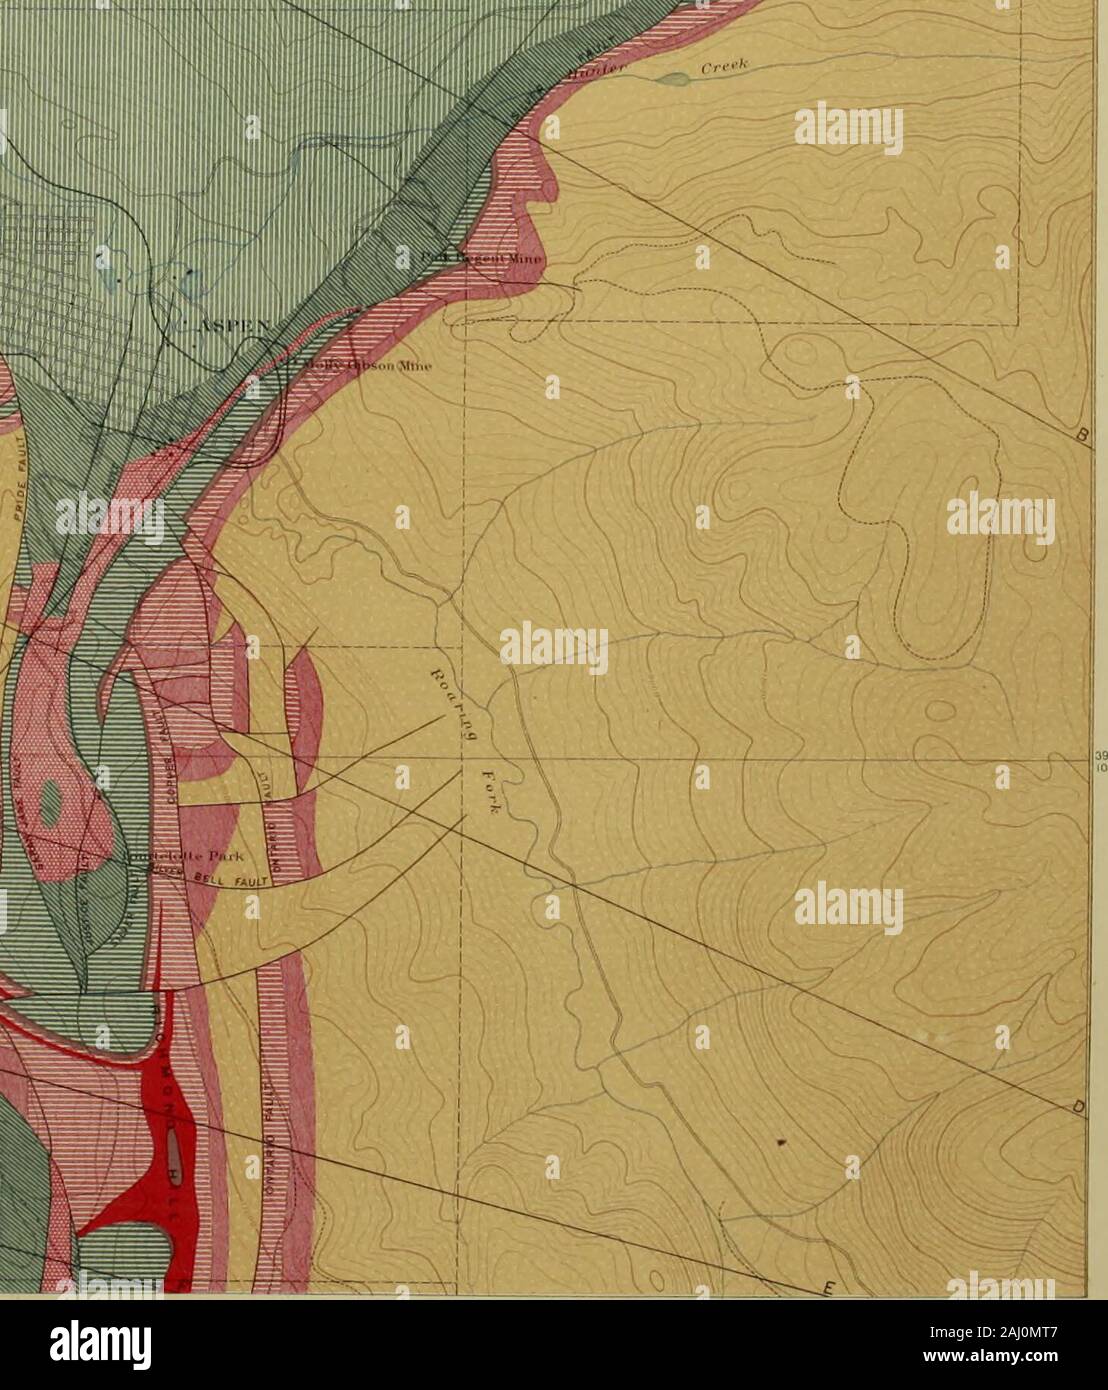 Atlas to accompany monograph XXXI on the geology of the Aspen District, Colorado . ASIKX DISTRICT SIIKKT SHEET VII SECTIO] Stock Photo